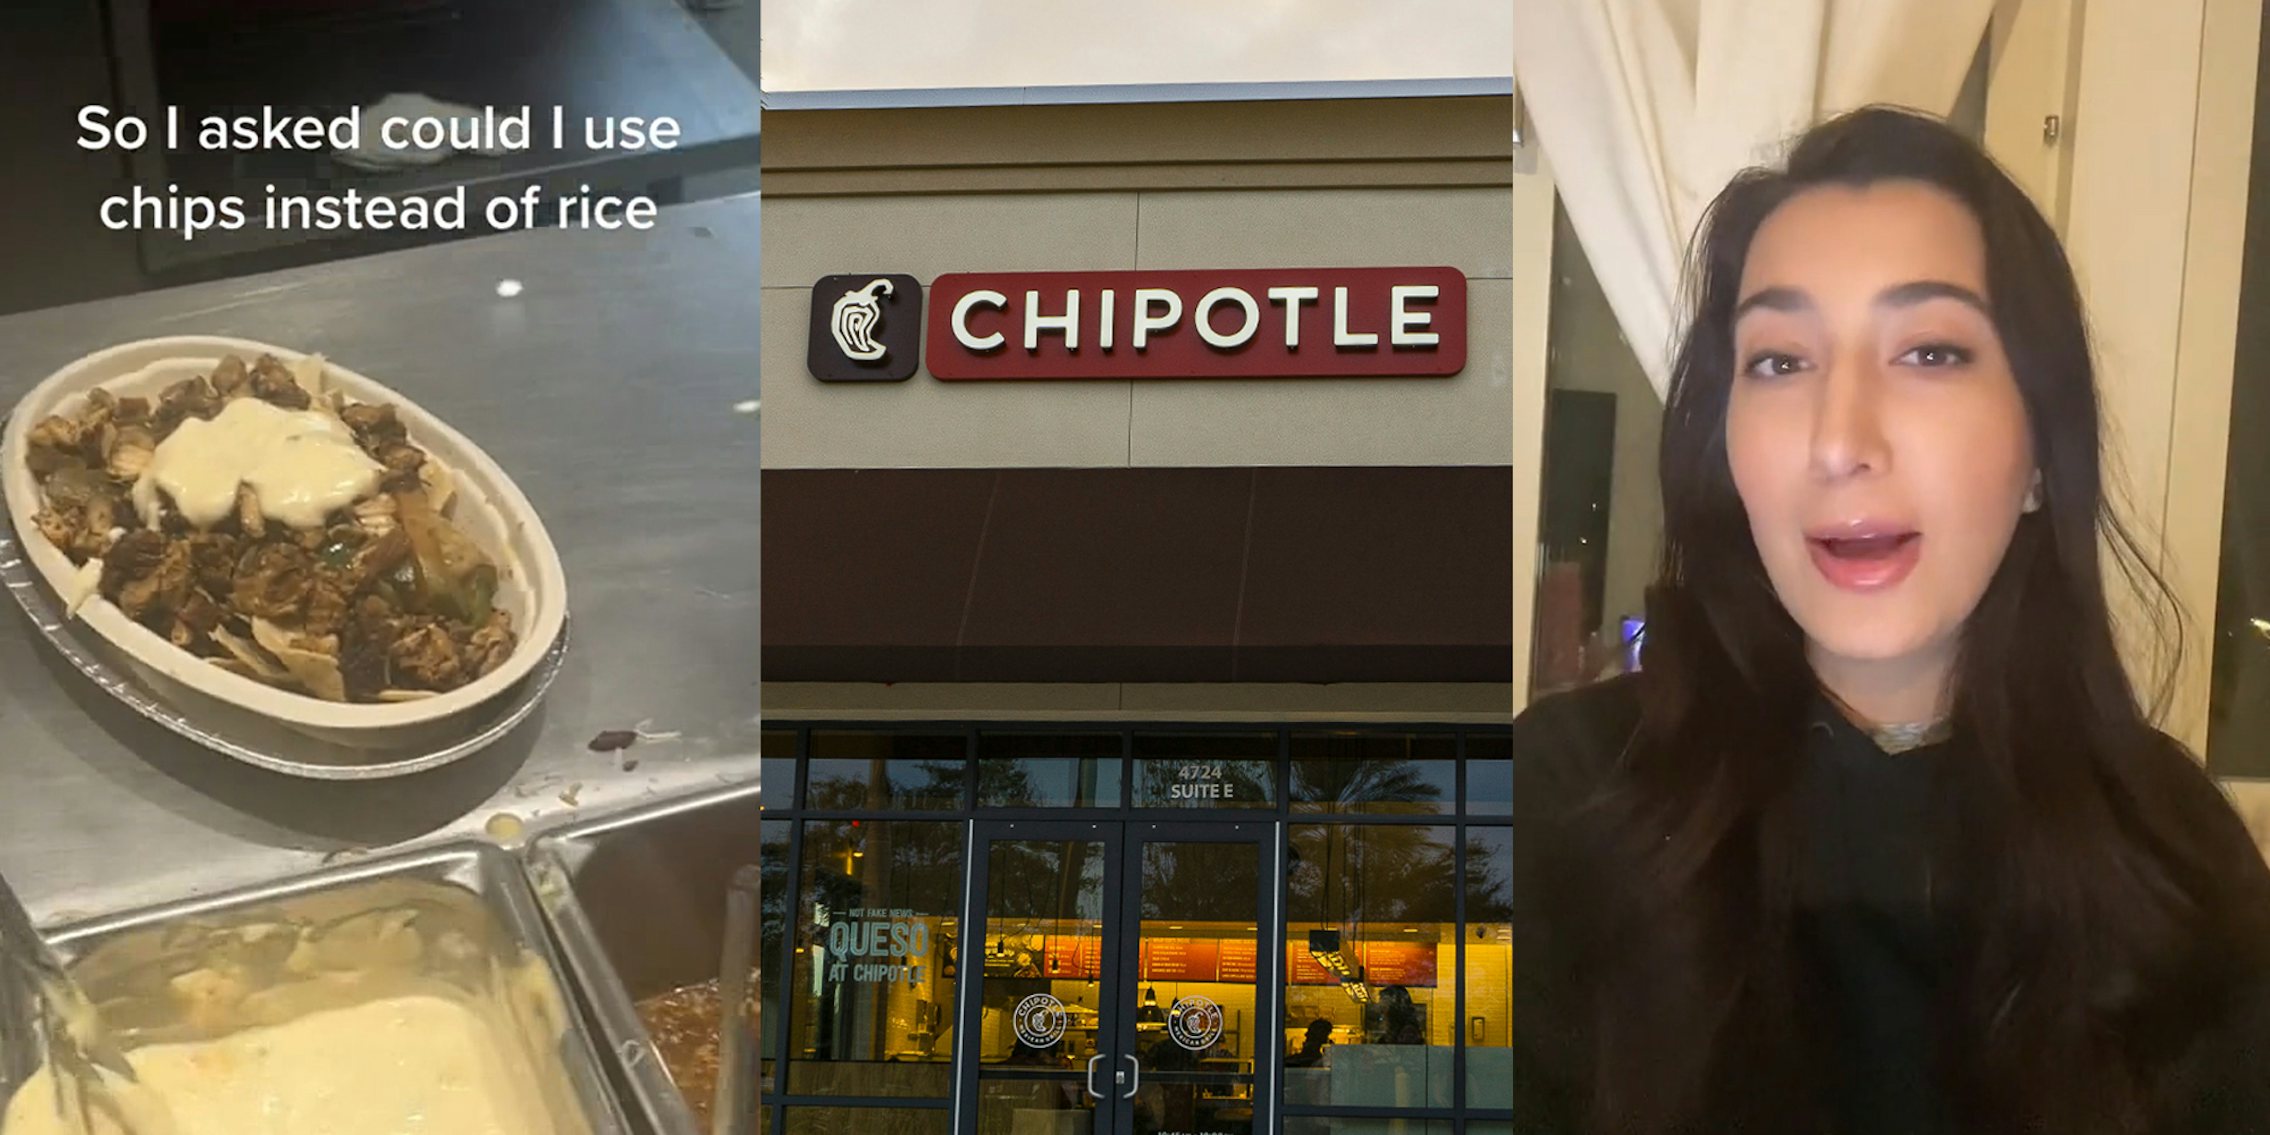 Chipotle bowl with chips instead of rice with caption 'So I asked could I use chips instead of rice' (l) Chipotle building with sign (c) former Chipotle employee speaking (r)